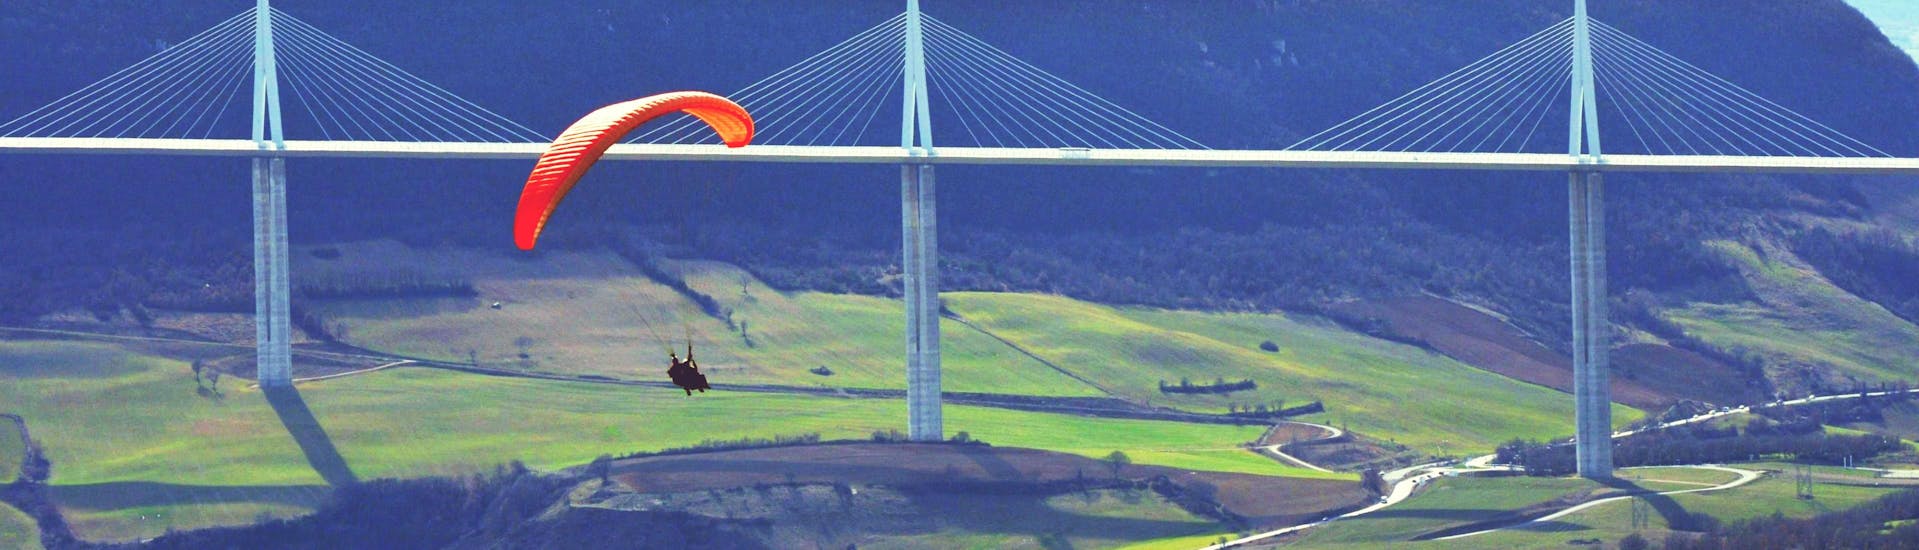 A paragliding pilot from Air Magic Parapente is doing a Tandem Paragliding Flight "Thermic" in front of the Millau Viaduct.